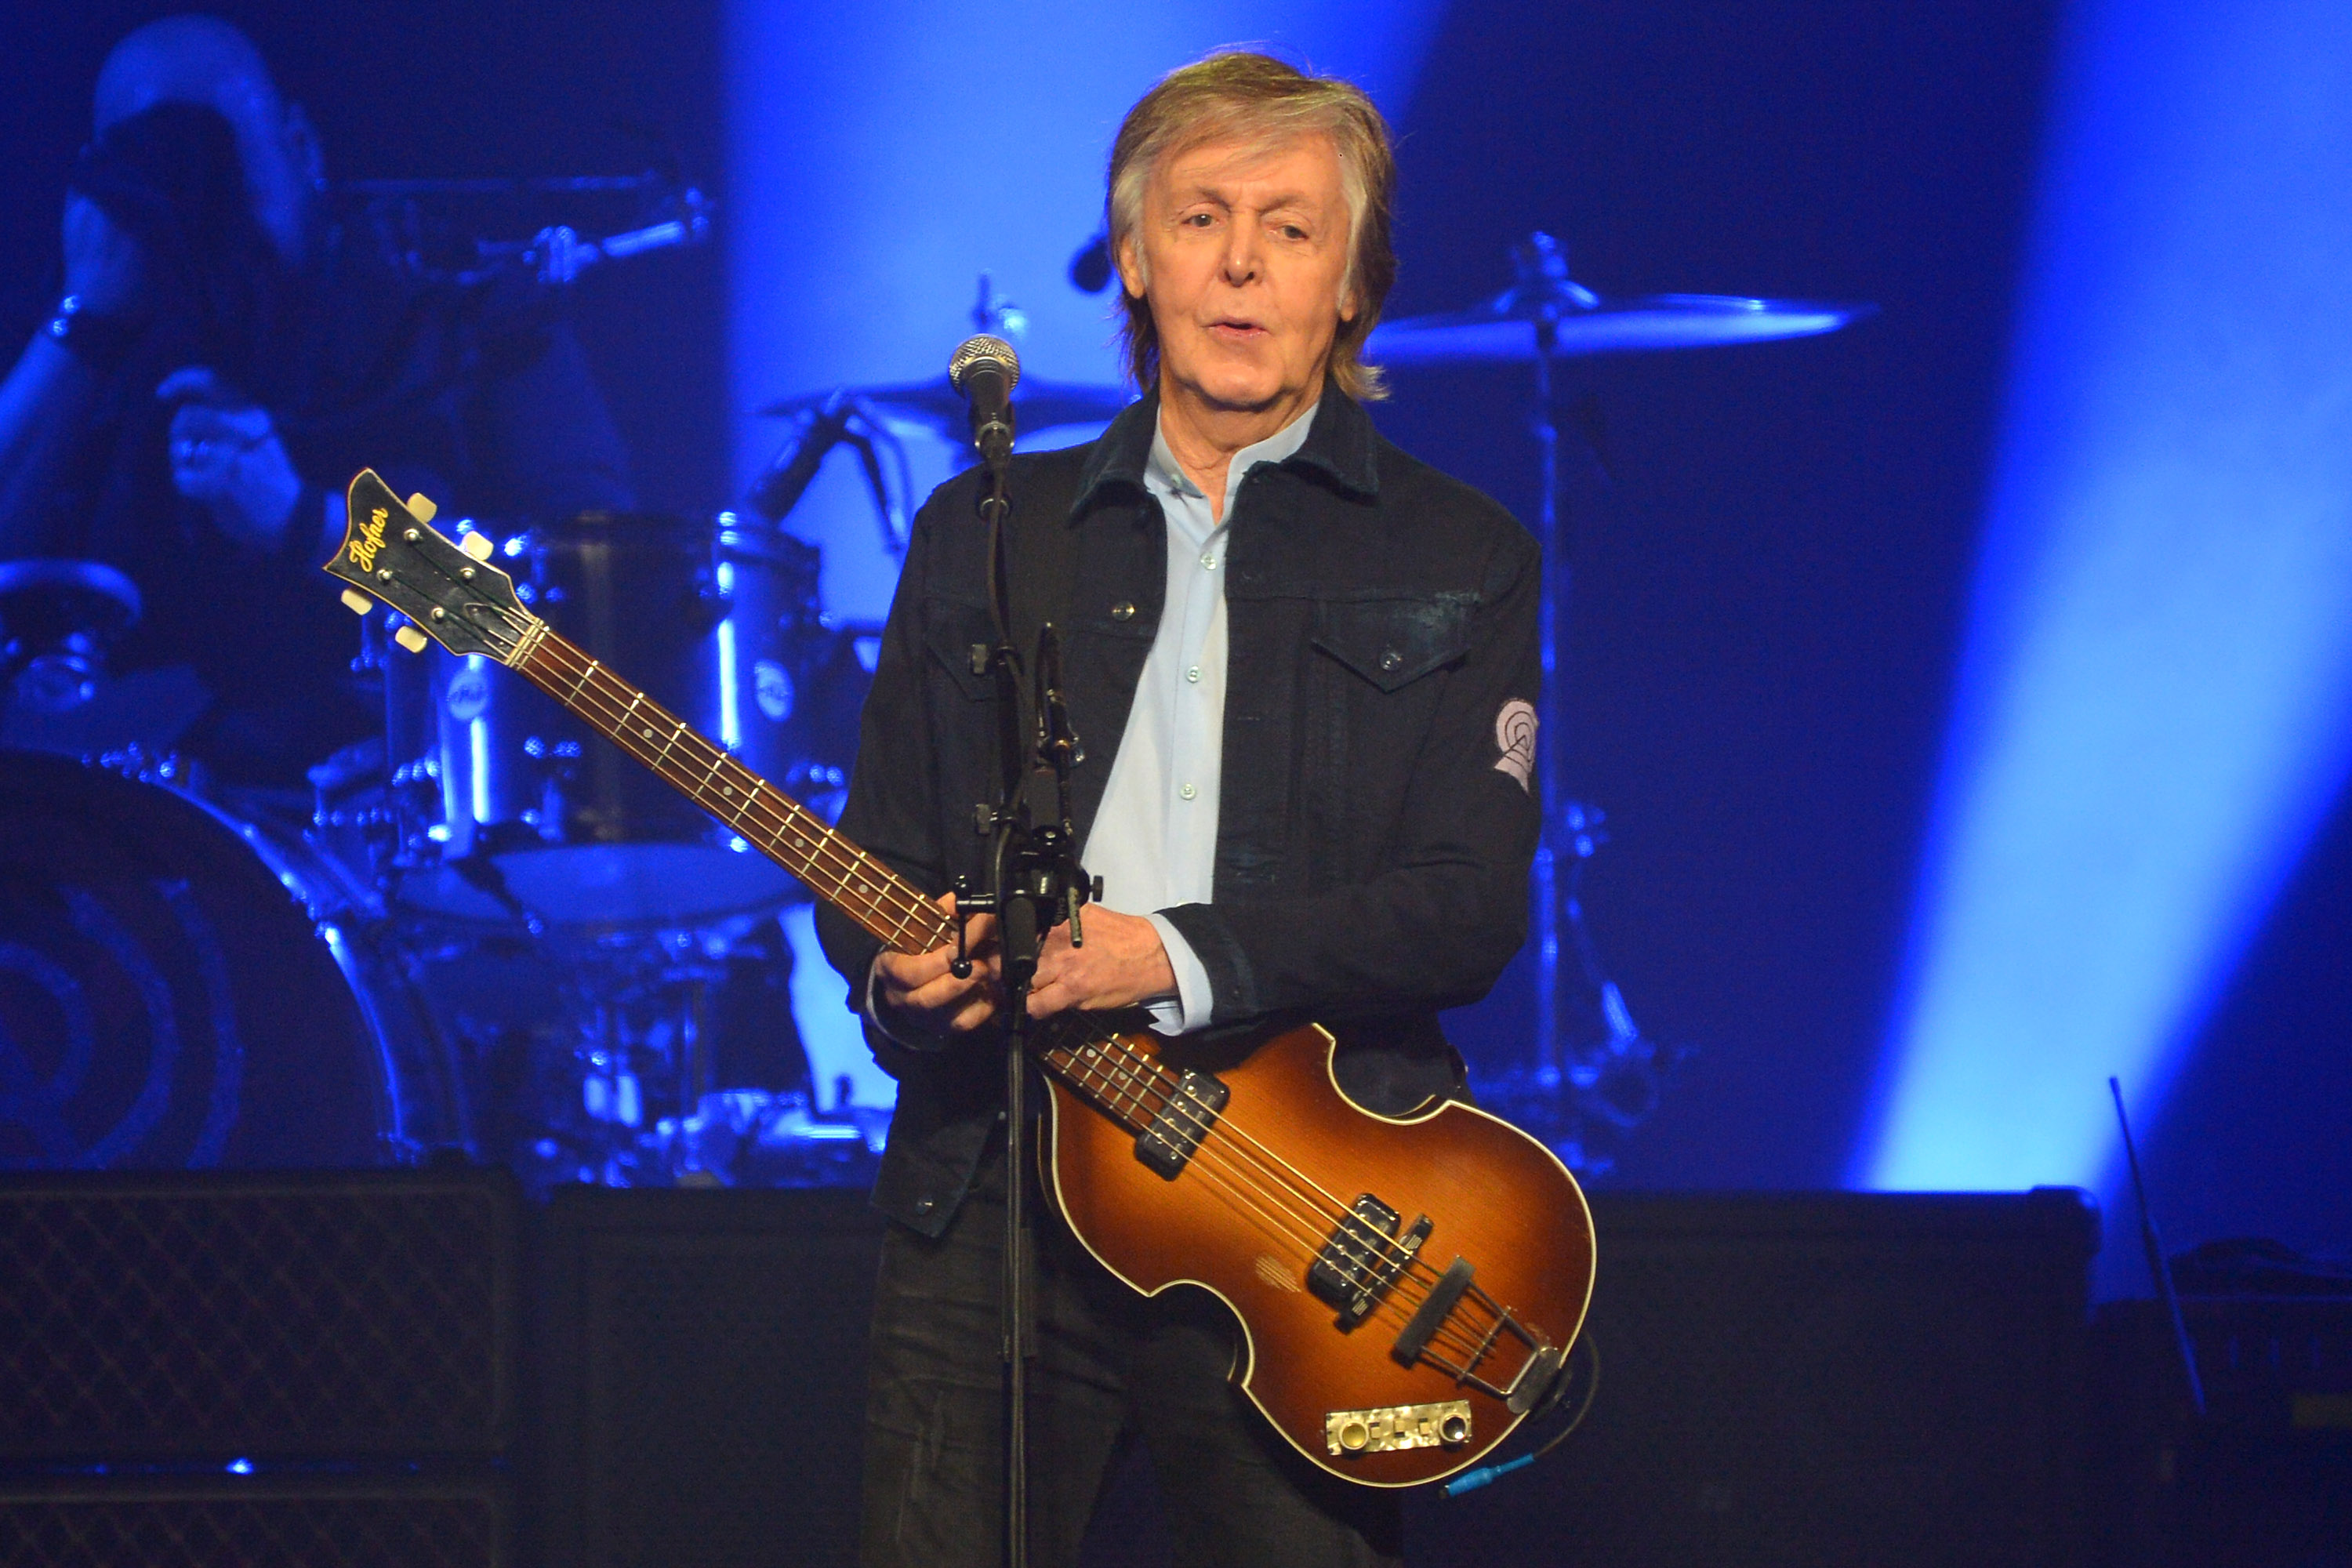 Where Paul McCartney Will Go on His 2022 U.S. Tour and How to Get Tickets